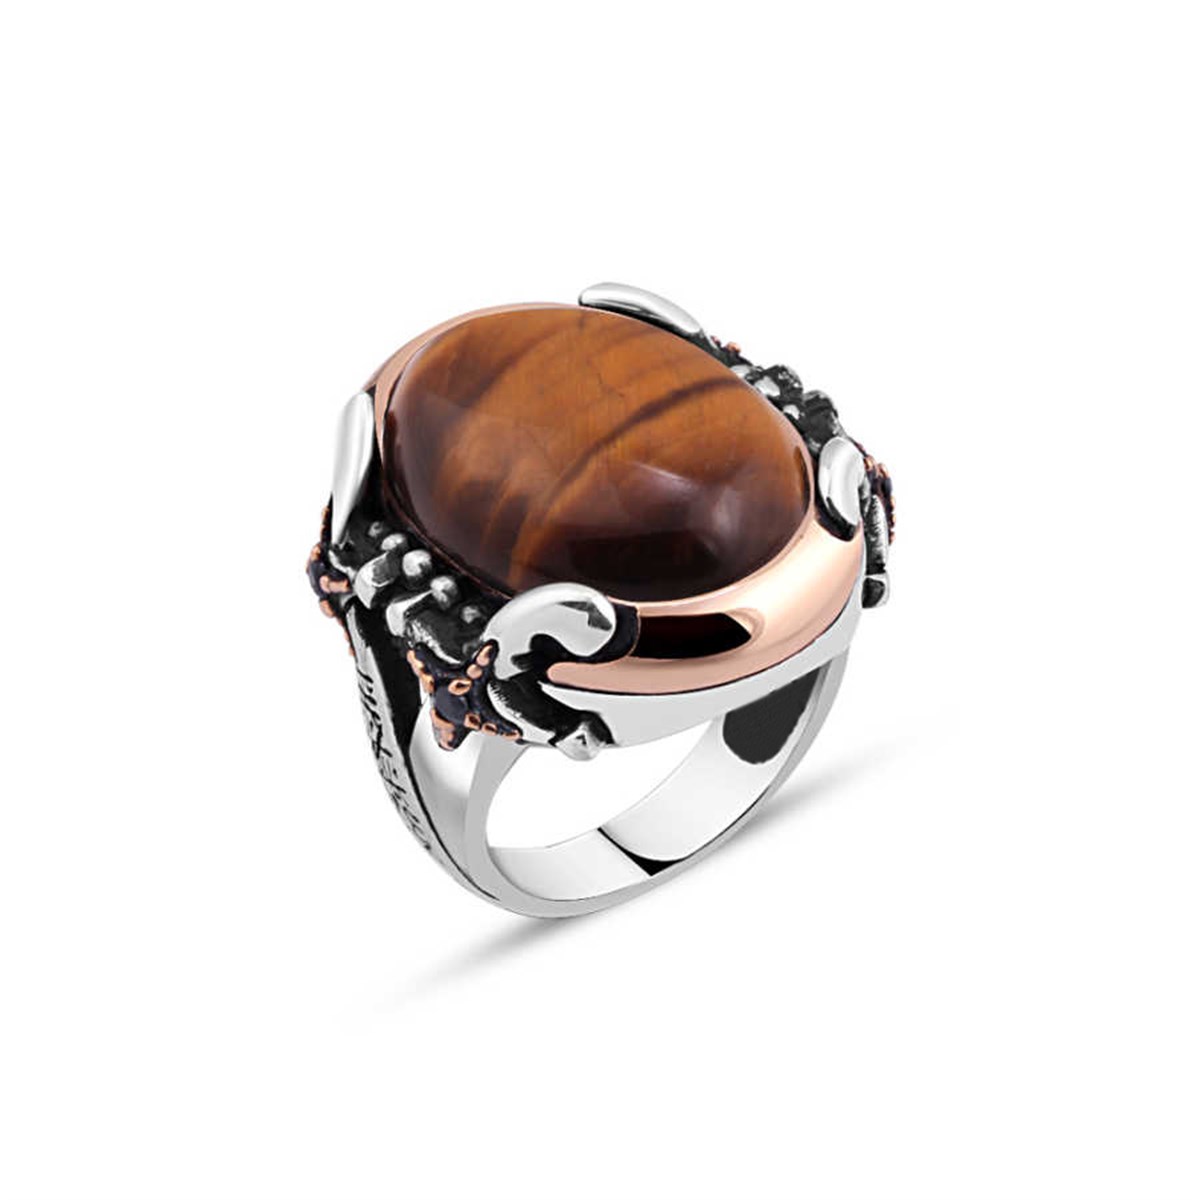 Hooded Tiger's Eye Sterling Silver Men's Ring with Sword Edges